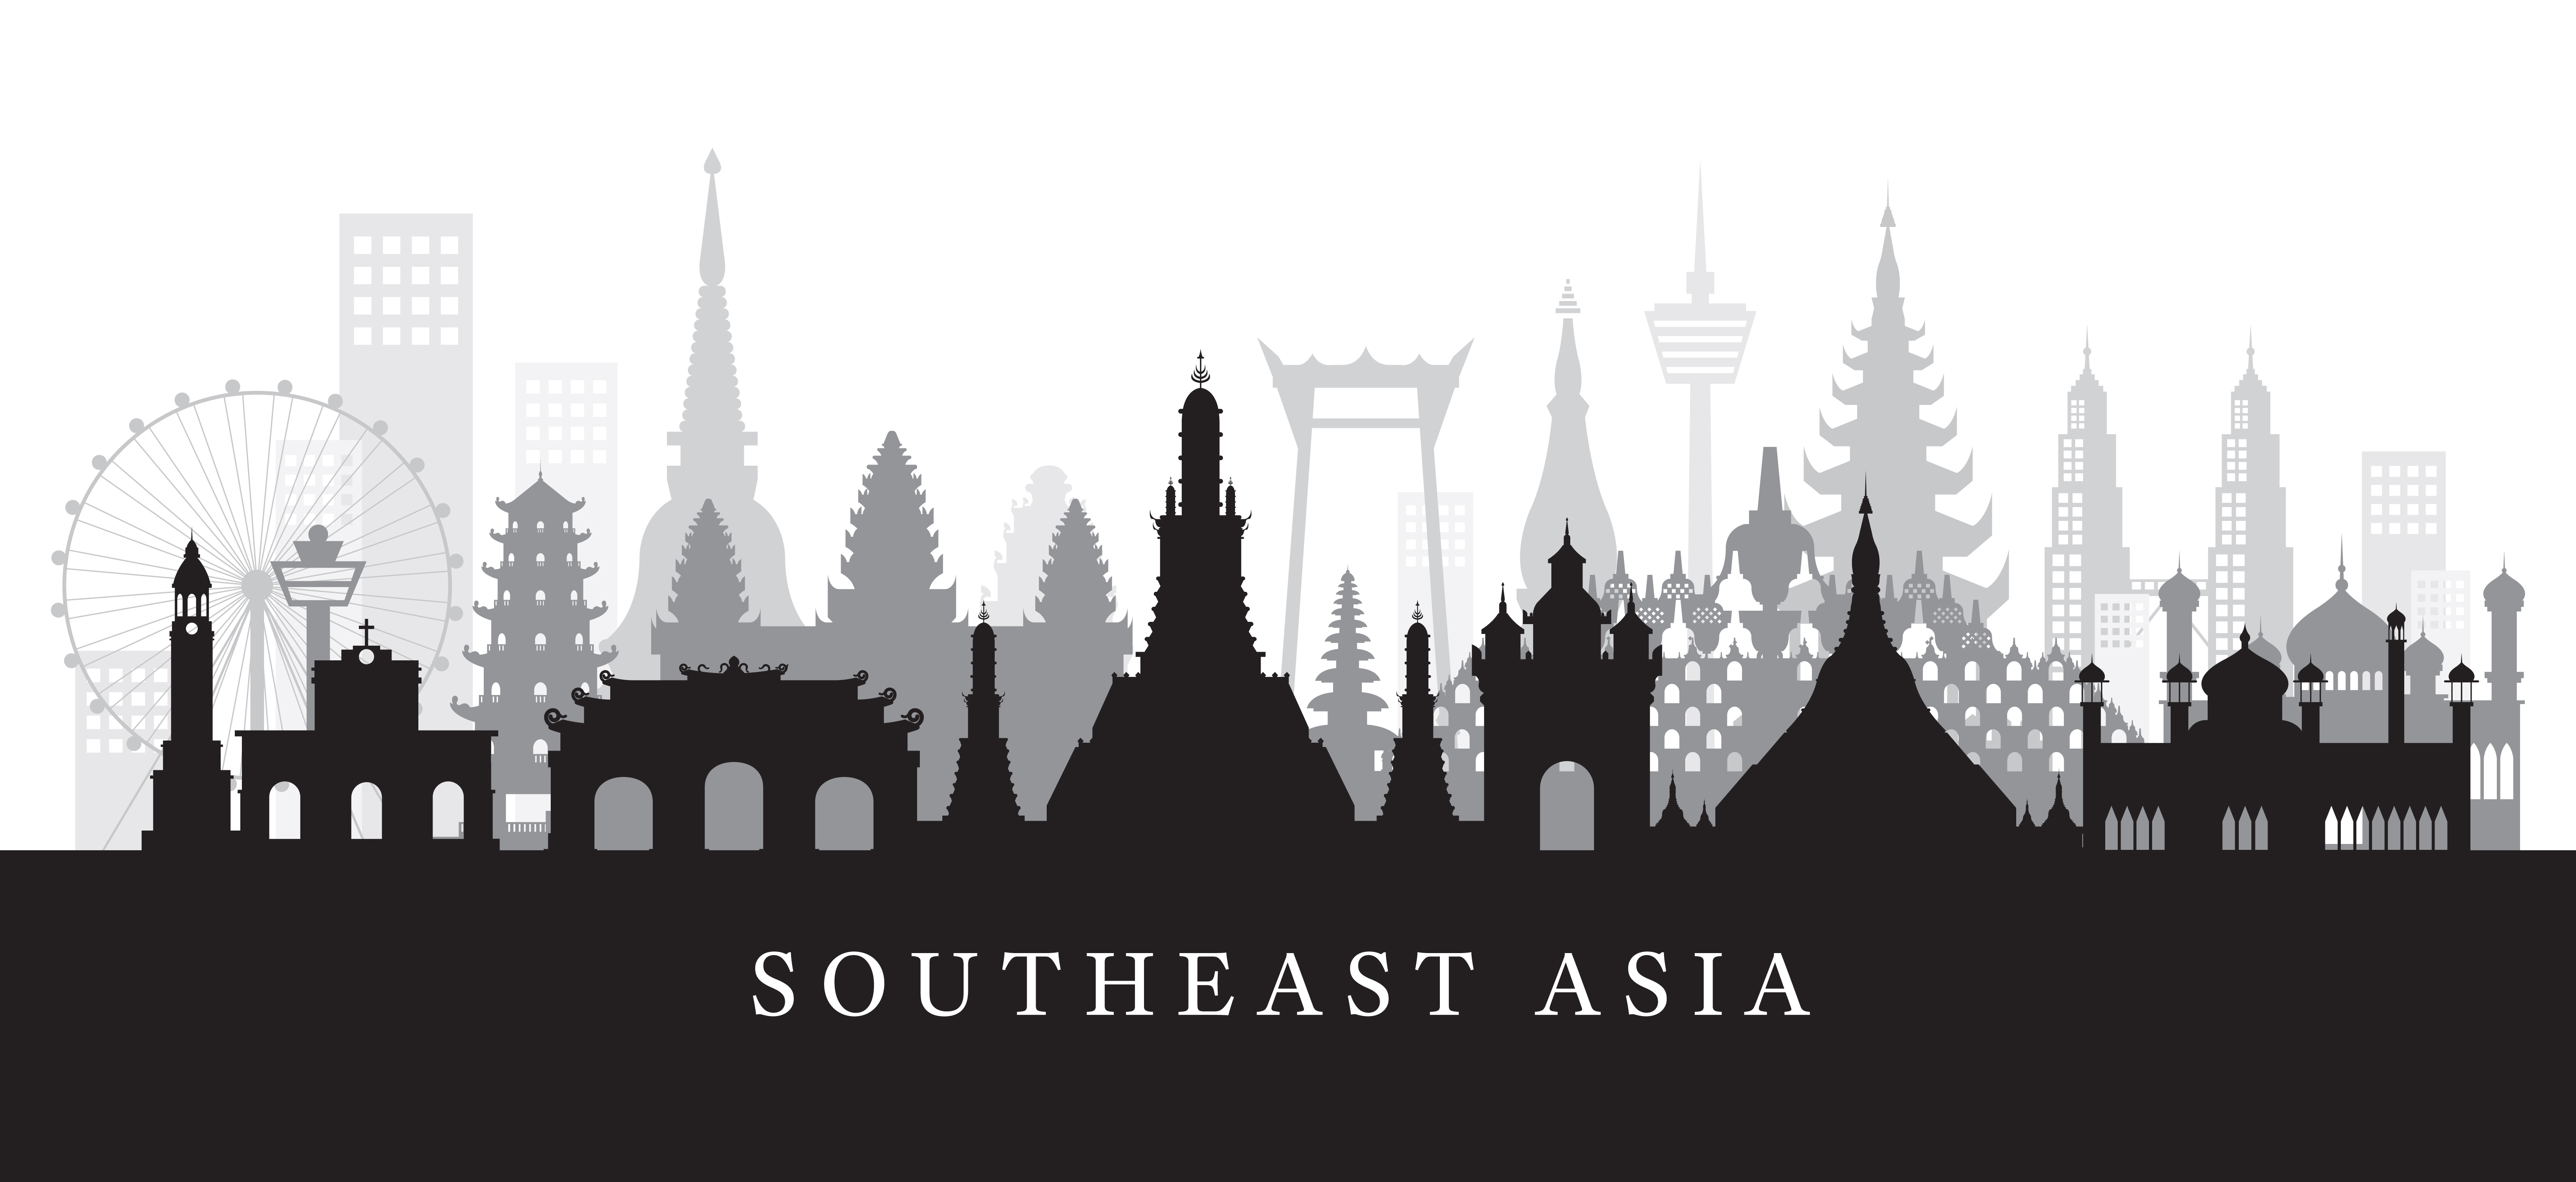 Social commerce still massive and growing across Southeast Asia: report